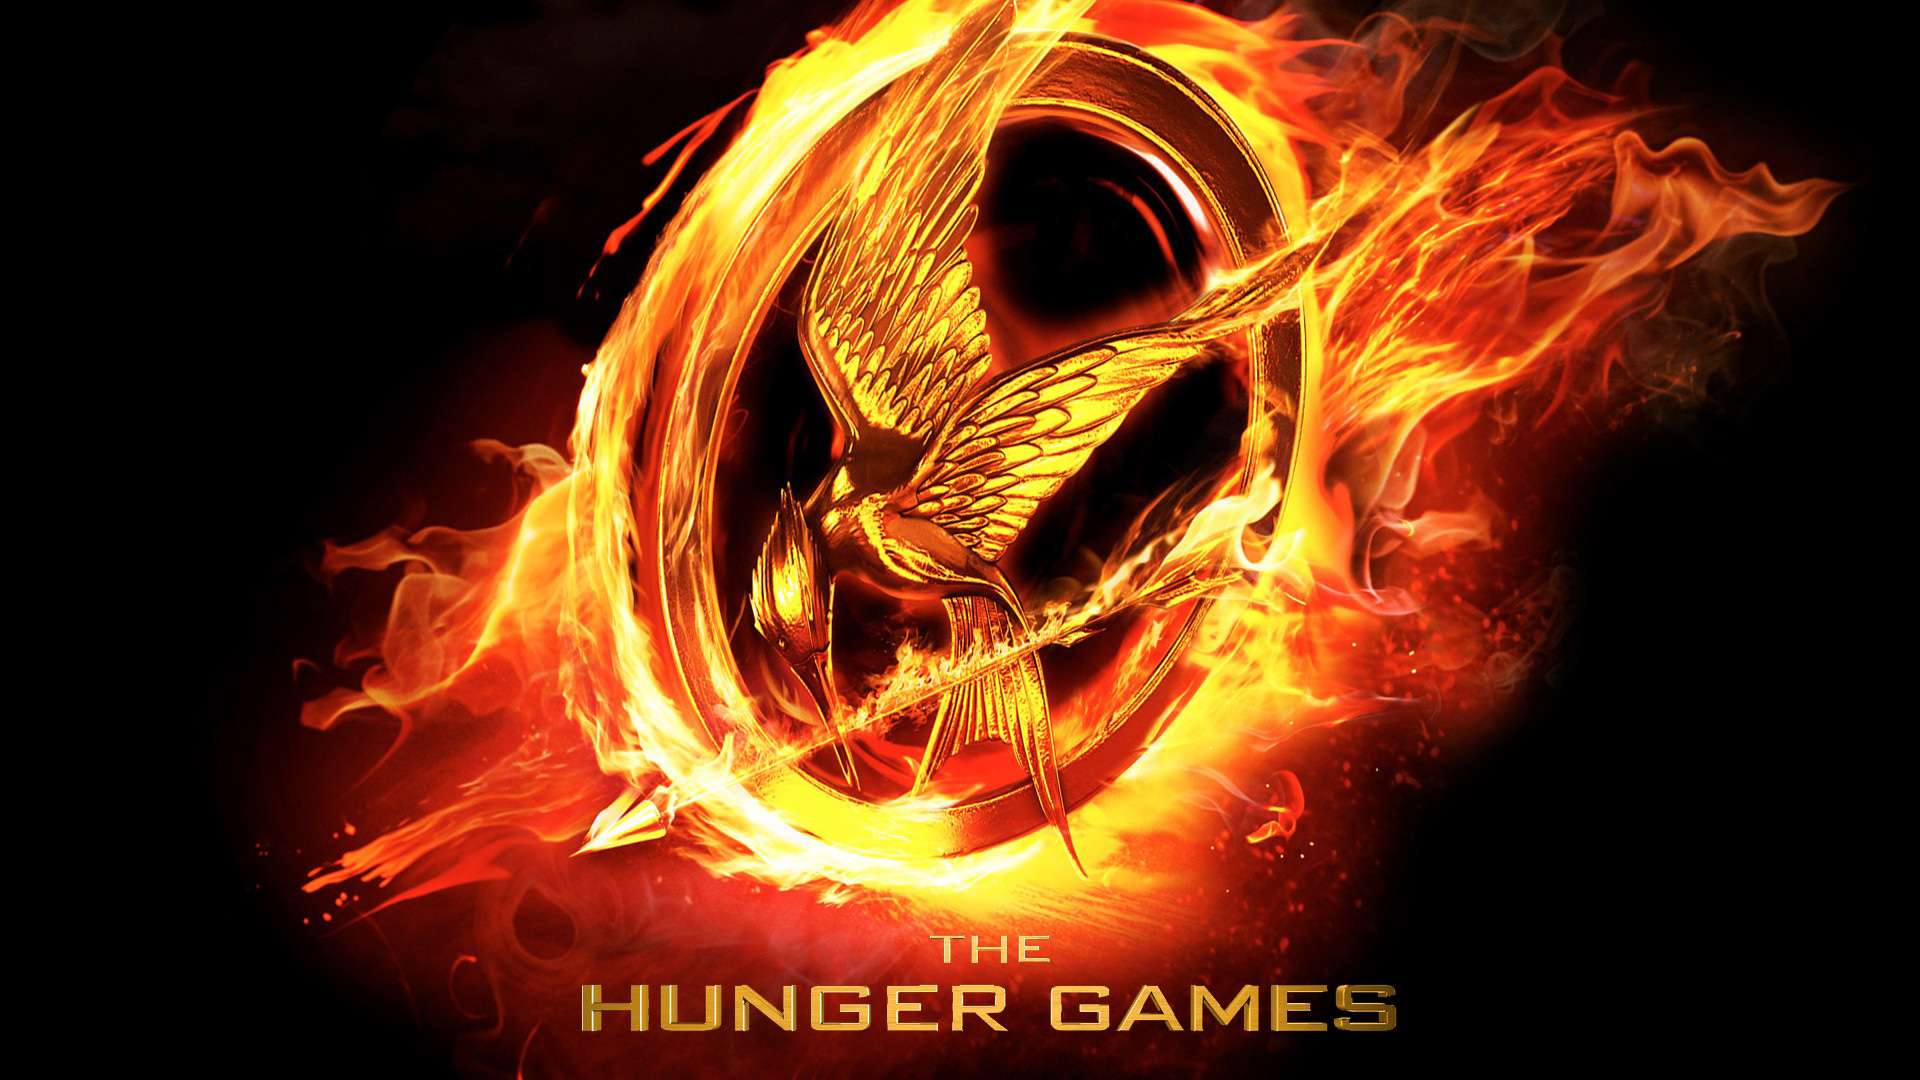 10 Books You Should Read After The Hunger Games